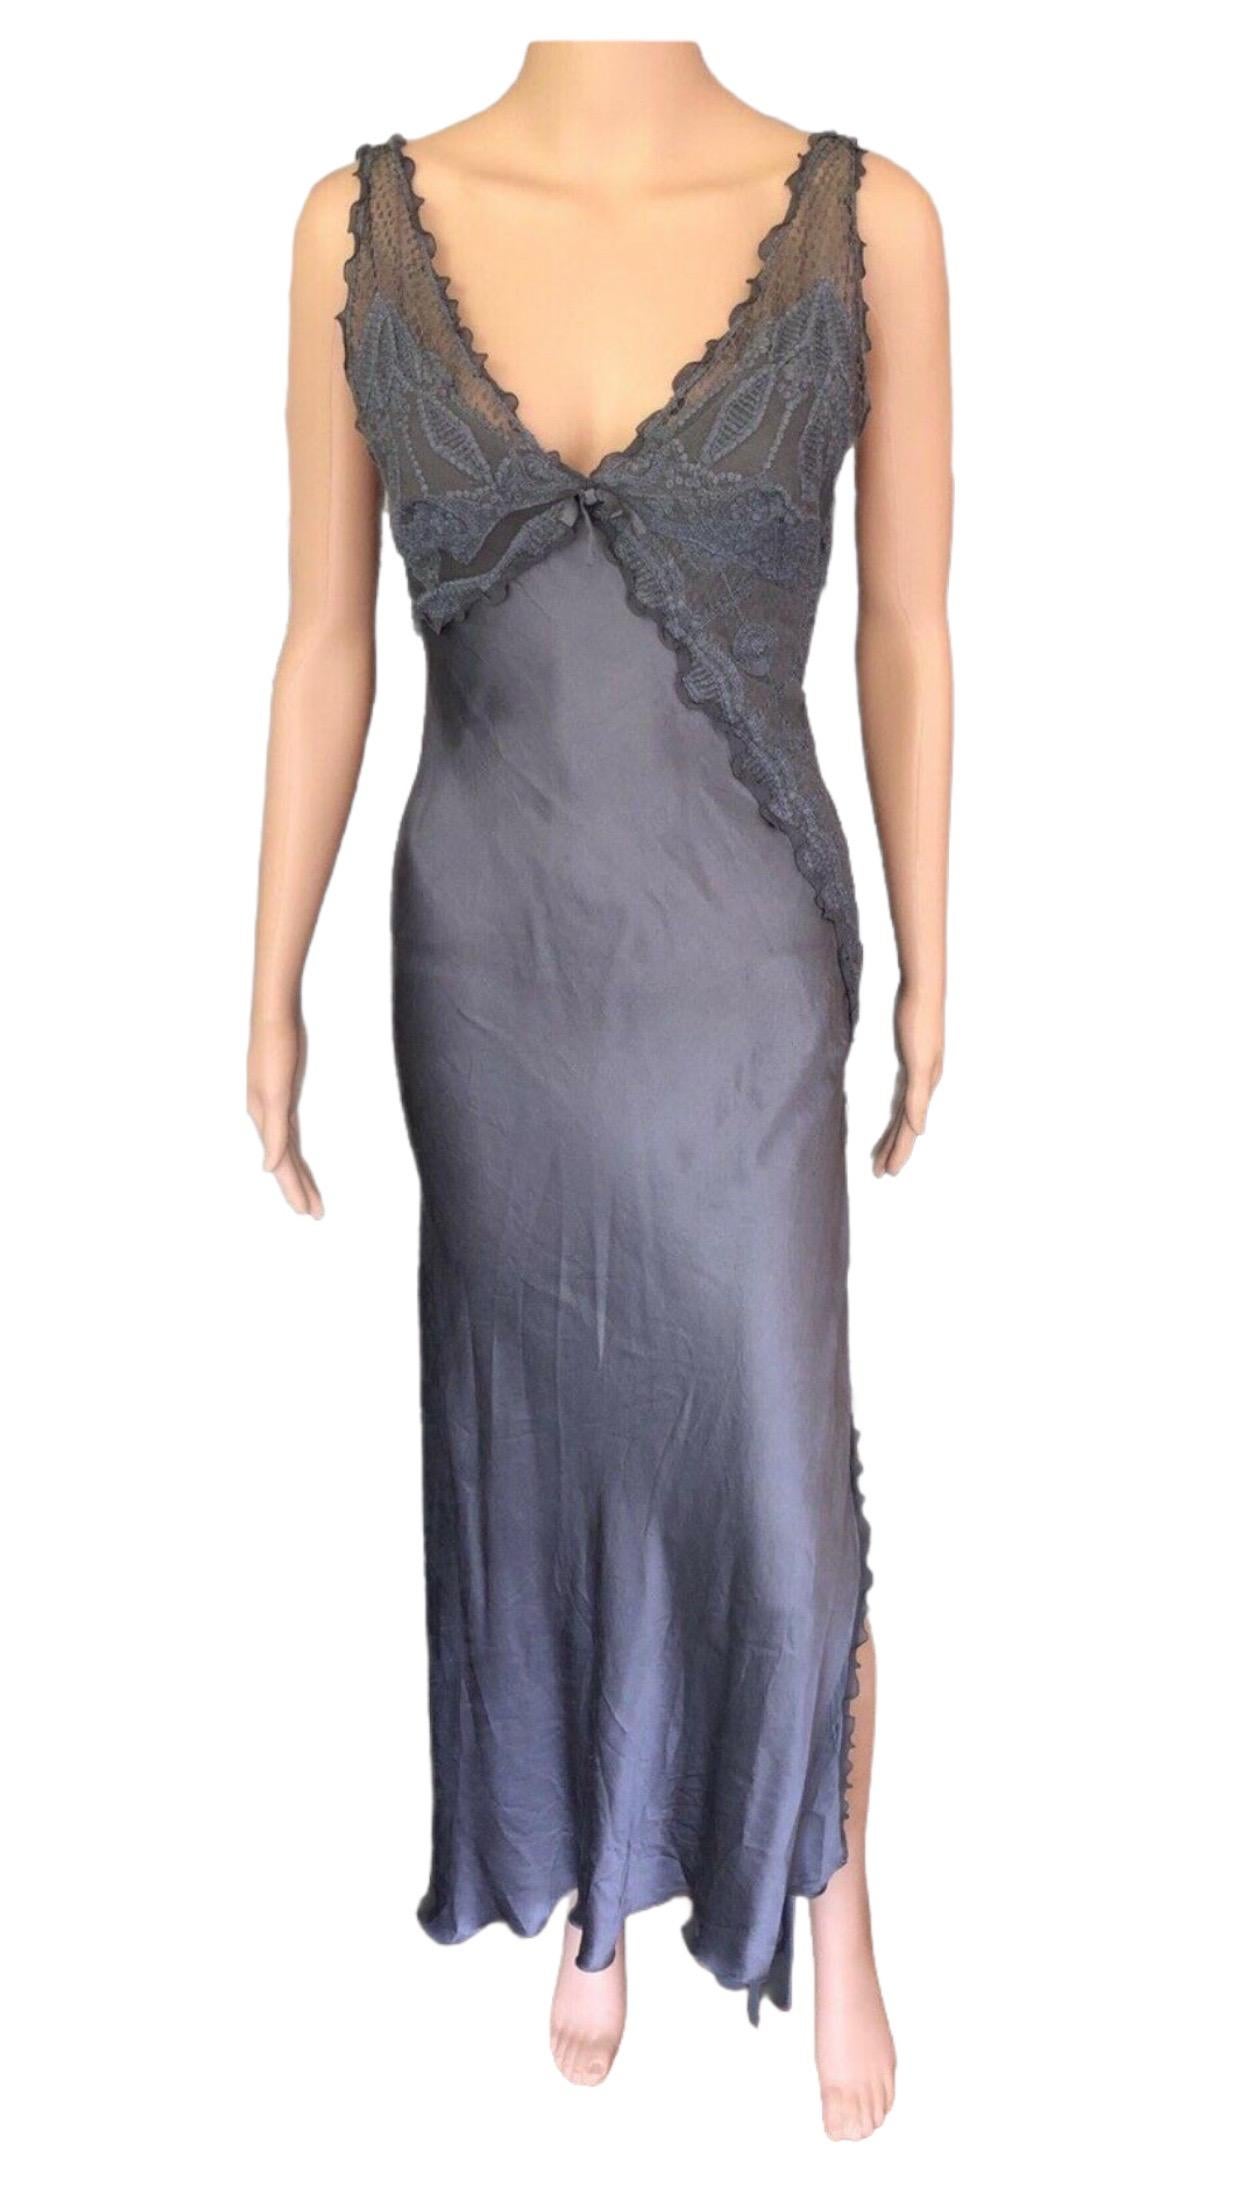 GIANNI VERSACE S/S 1997 Runway Vintage Satin Lace Embroidered Gown  For Sale 2